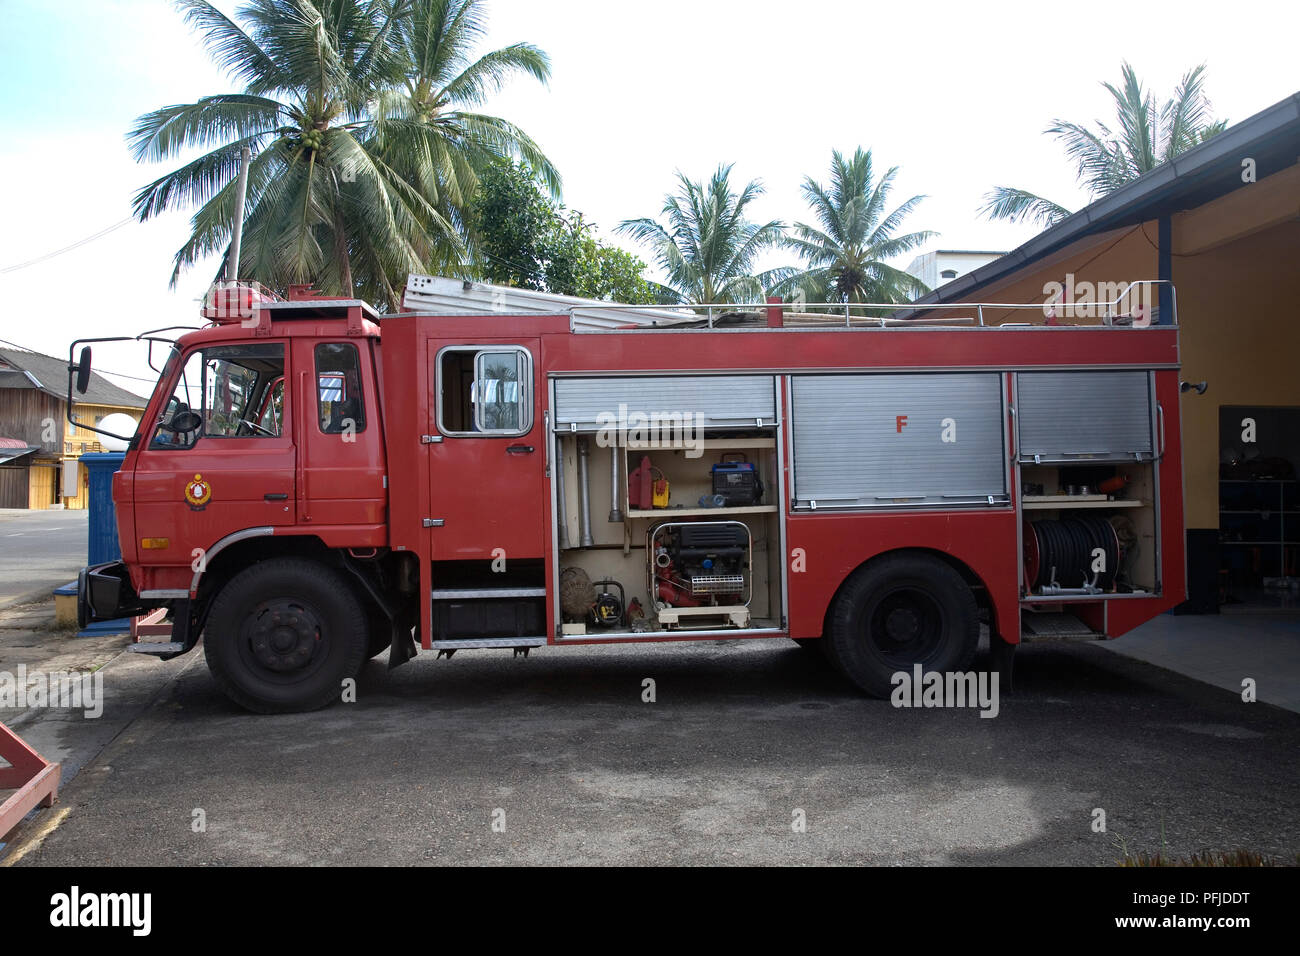 Malaysia, fire engine parked outside building near palm trees, side view Stock Photo